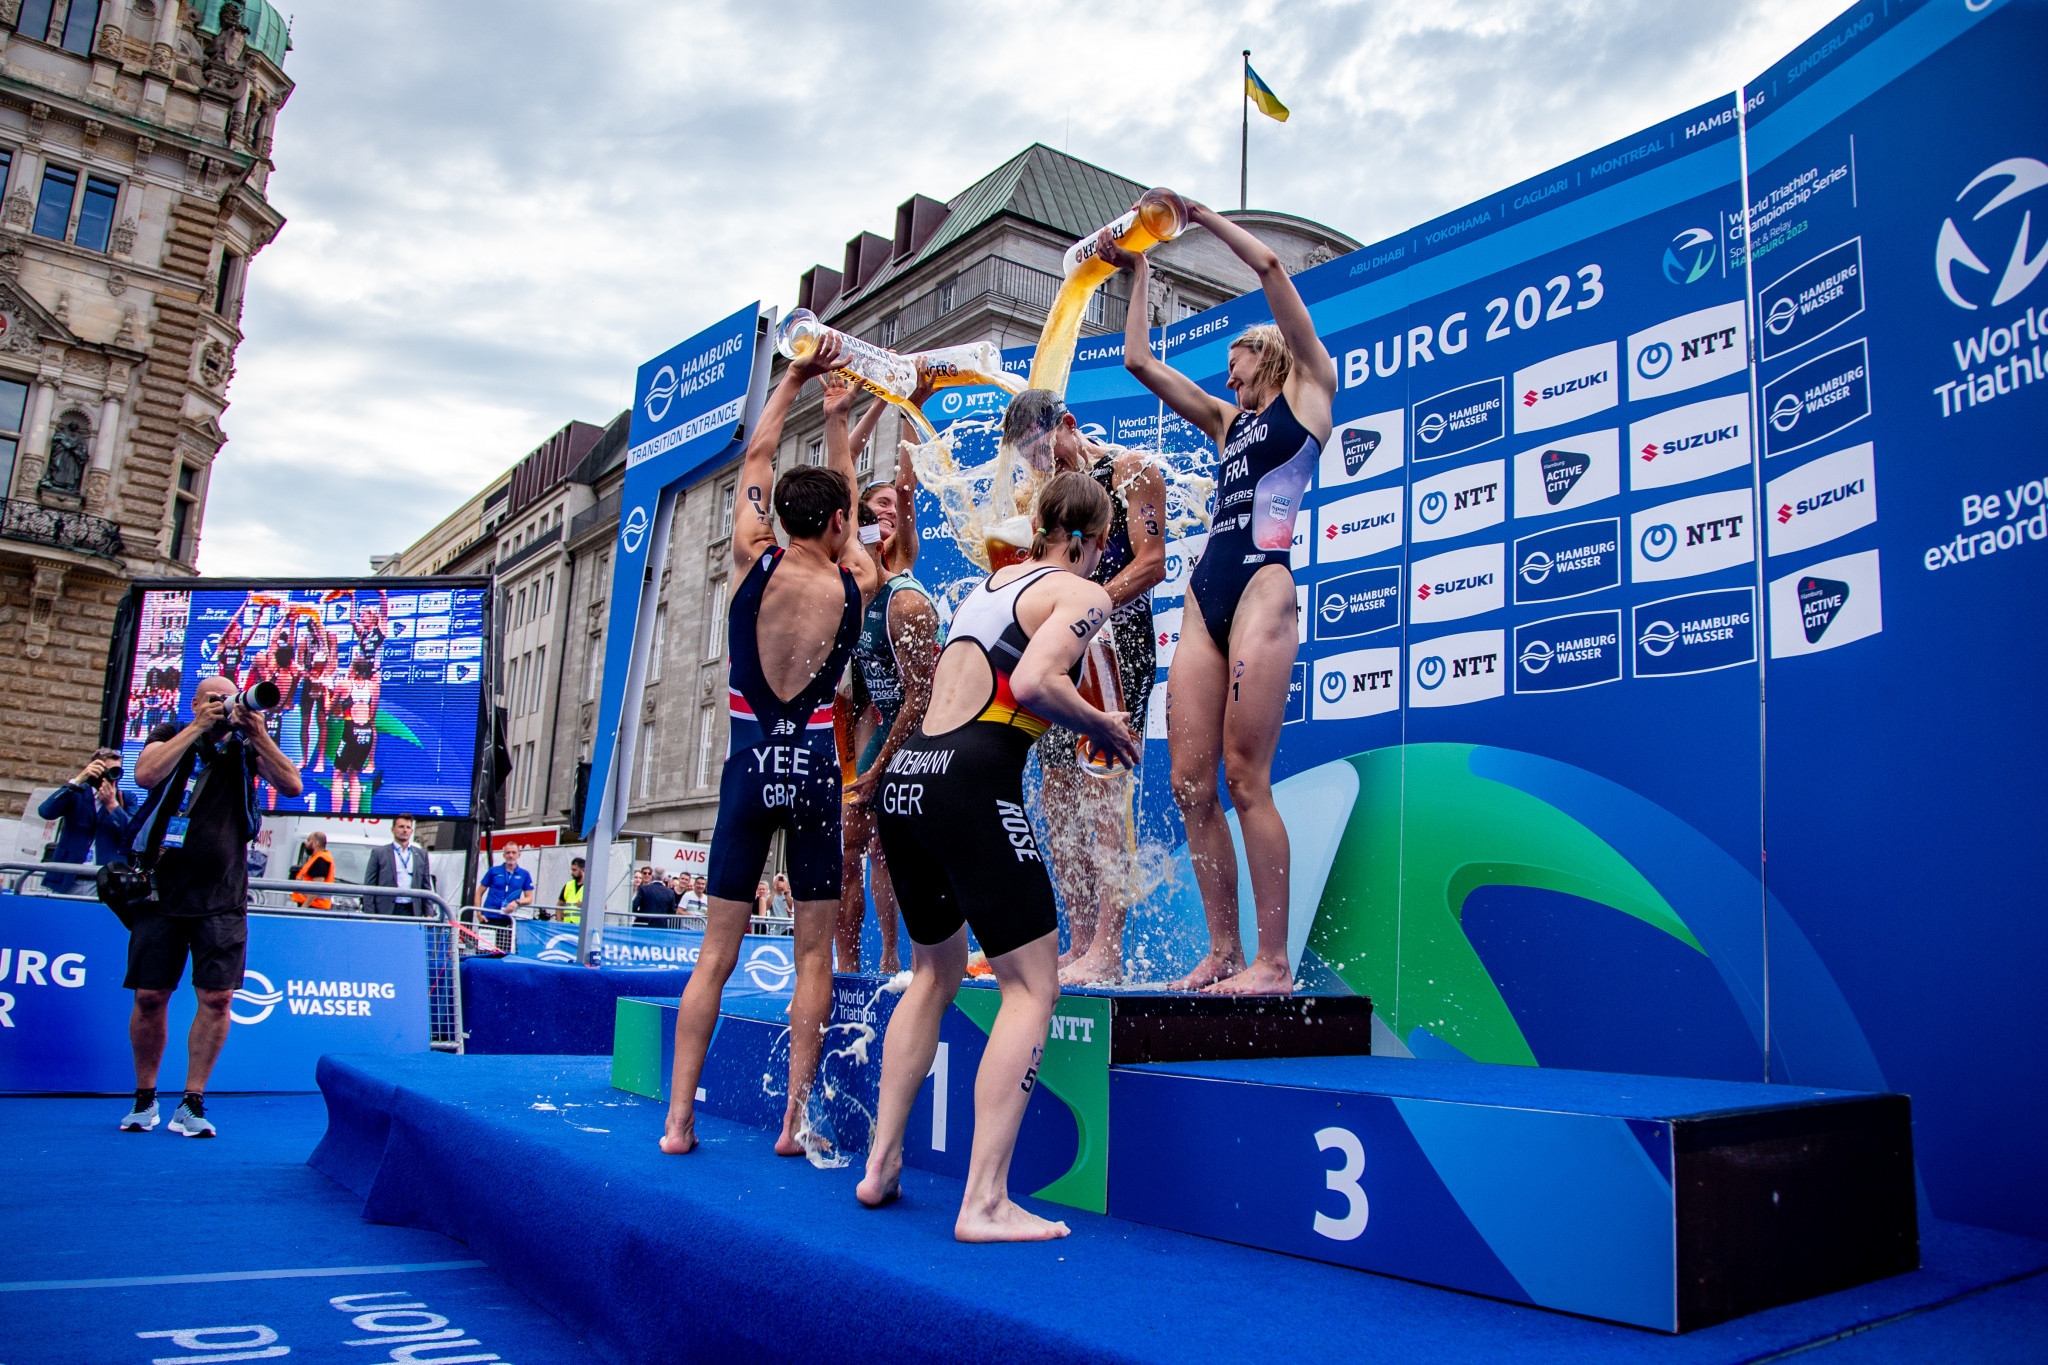 The super-sprint medallists cooled off with a refreshing drink following the final race ©World Triathlon